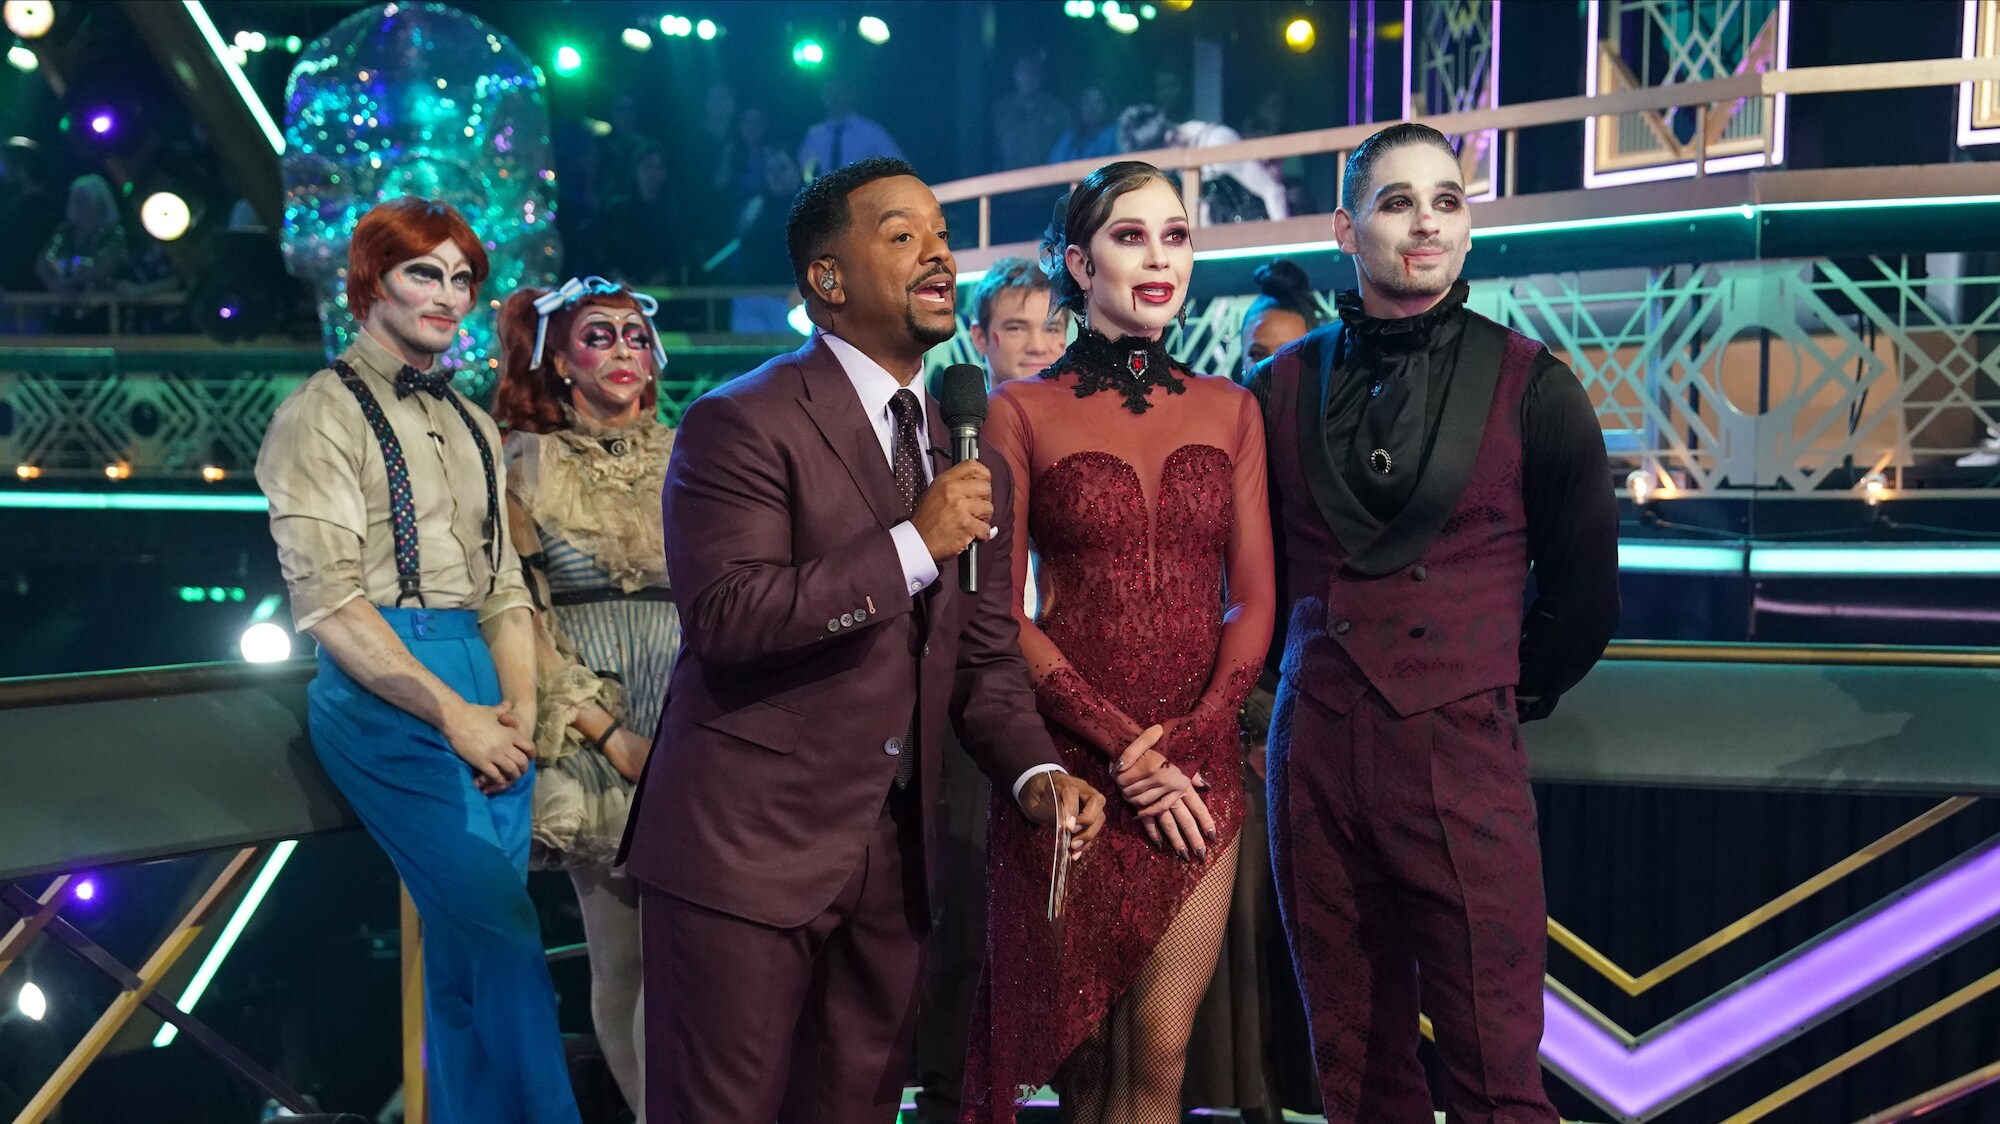 DANCING WITH THE STARS - “Halloween Night” – The ballroom transforms for a haunting “Halloween Night” as the nine remaining couples perform bewitching new routines. As an extra trick (or treat), the contestants are split into groups to compete in a terrifying team dance. “Dancing with the Stars” will stream live MONDAY, OCT. 31 (8:00pm ET / 5:00pm PT), on Disney+. (ABC/Eric McCandless) ALFONSO RIBEIRO, GABBY WINDEY, ALAN BERSTEN